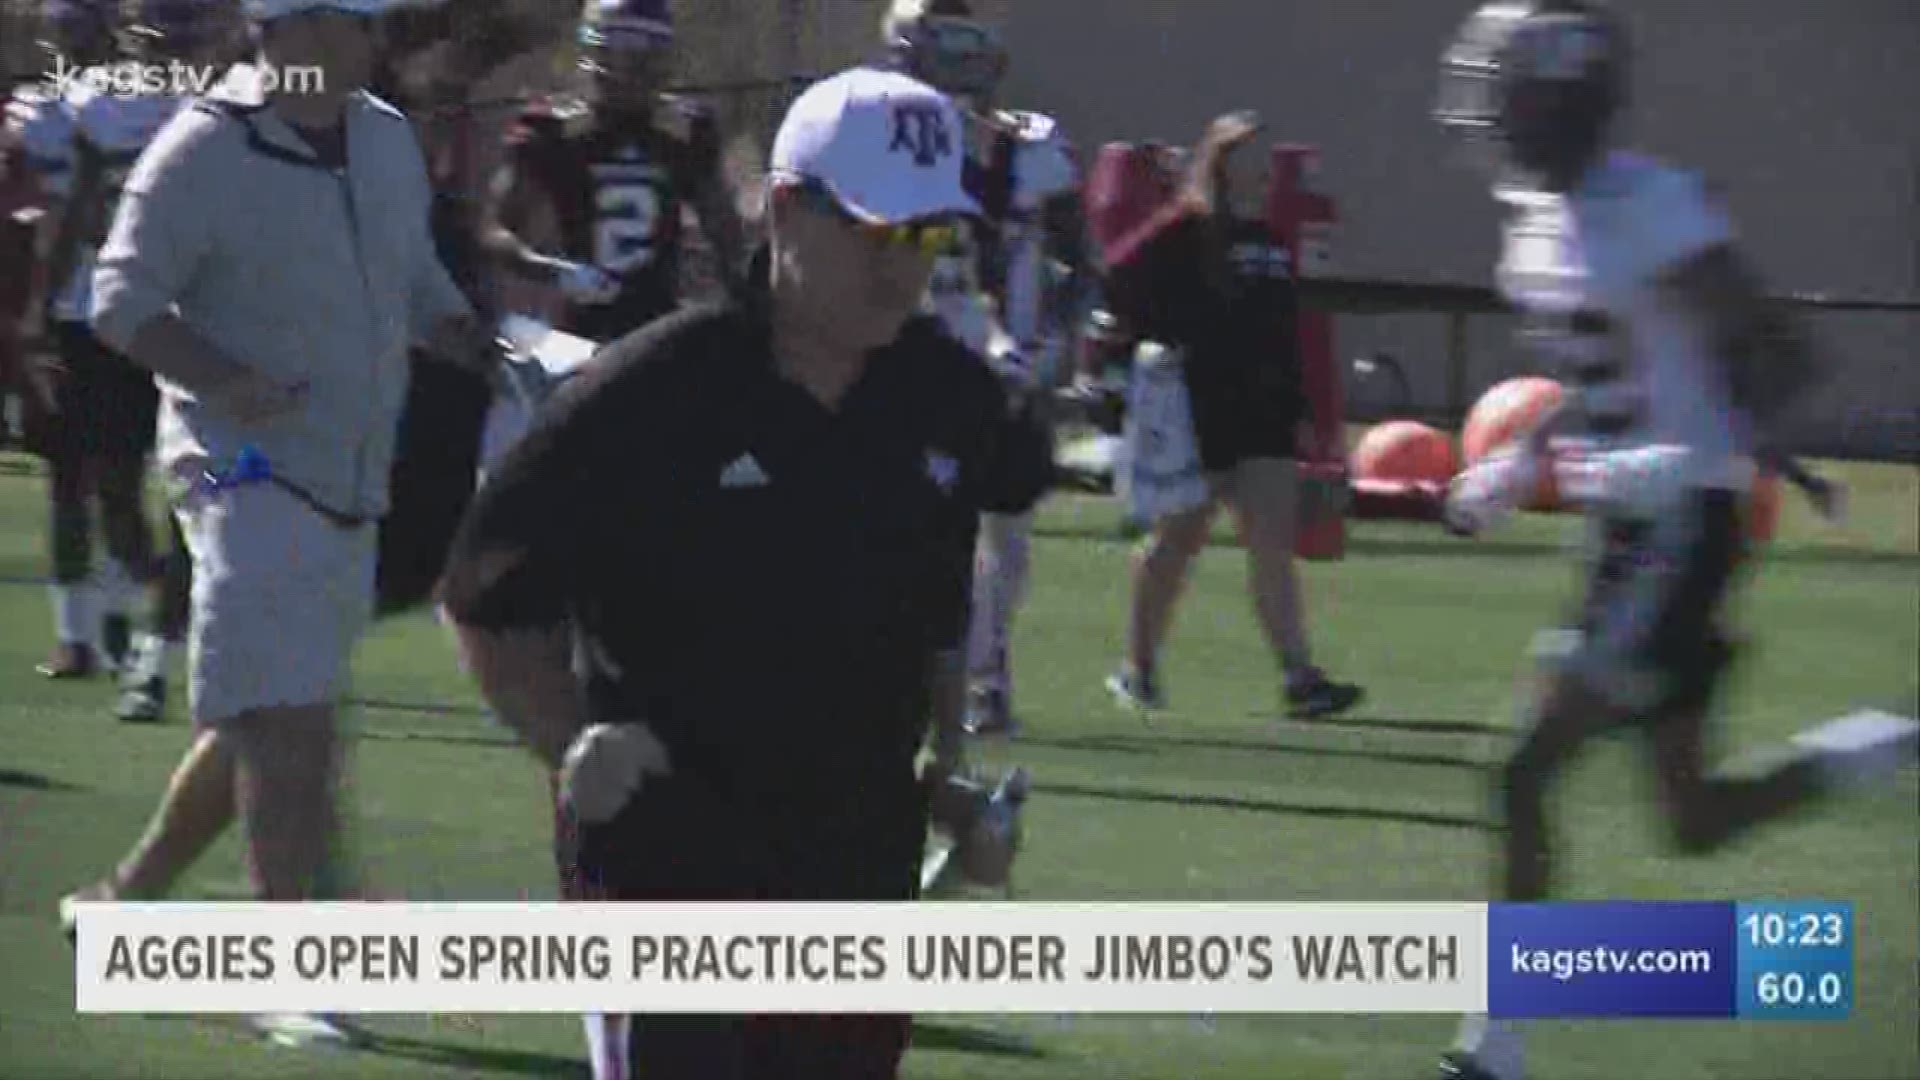 Texas A&M held its first spring practice under Jimbo Fisher on Tuesday.